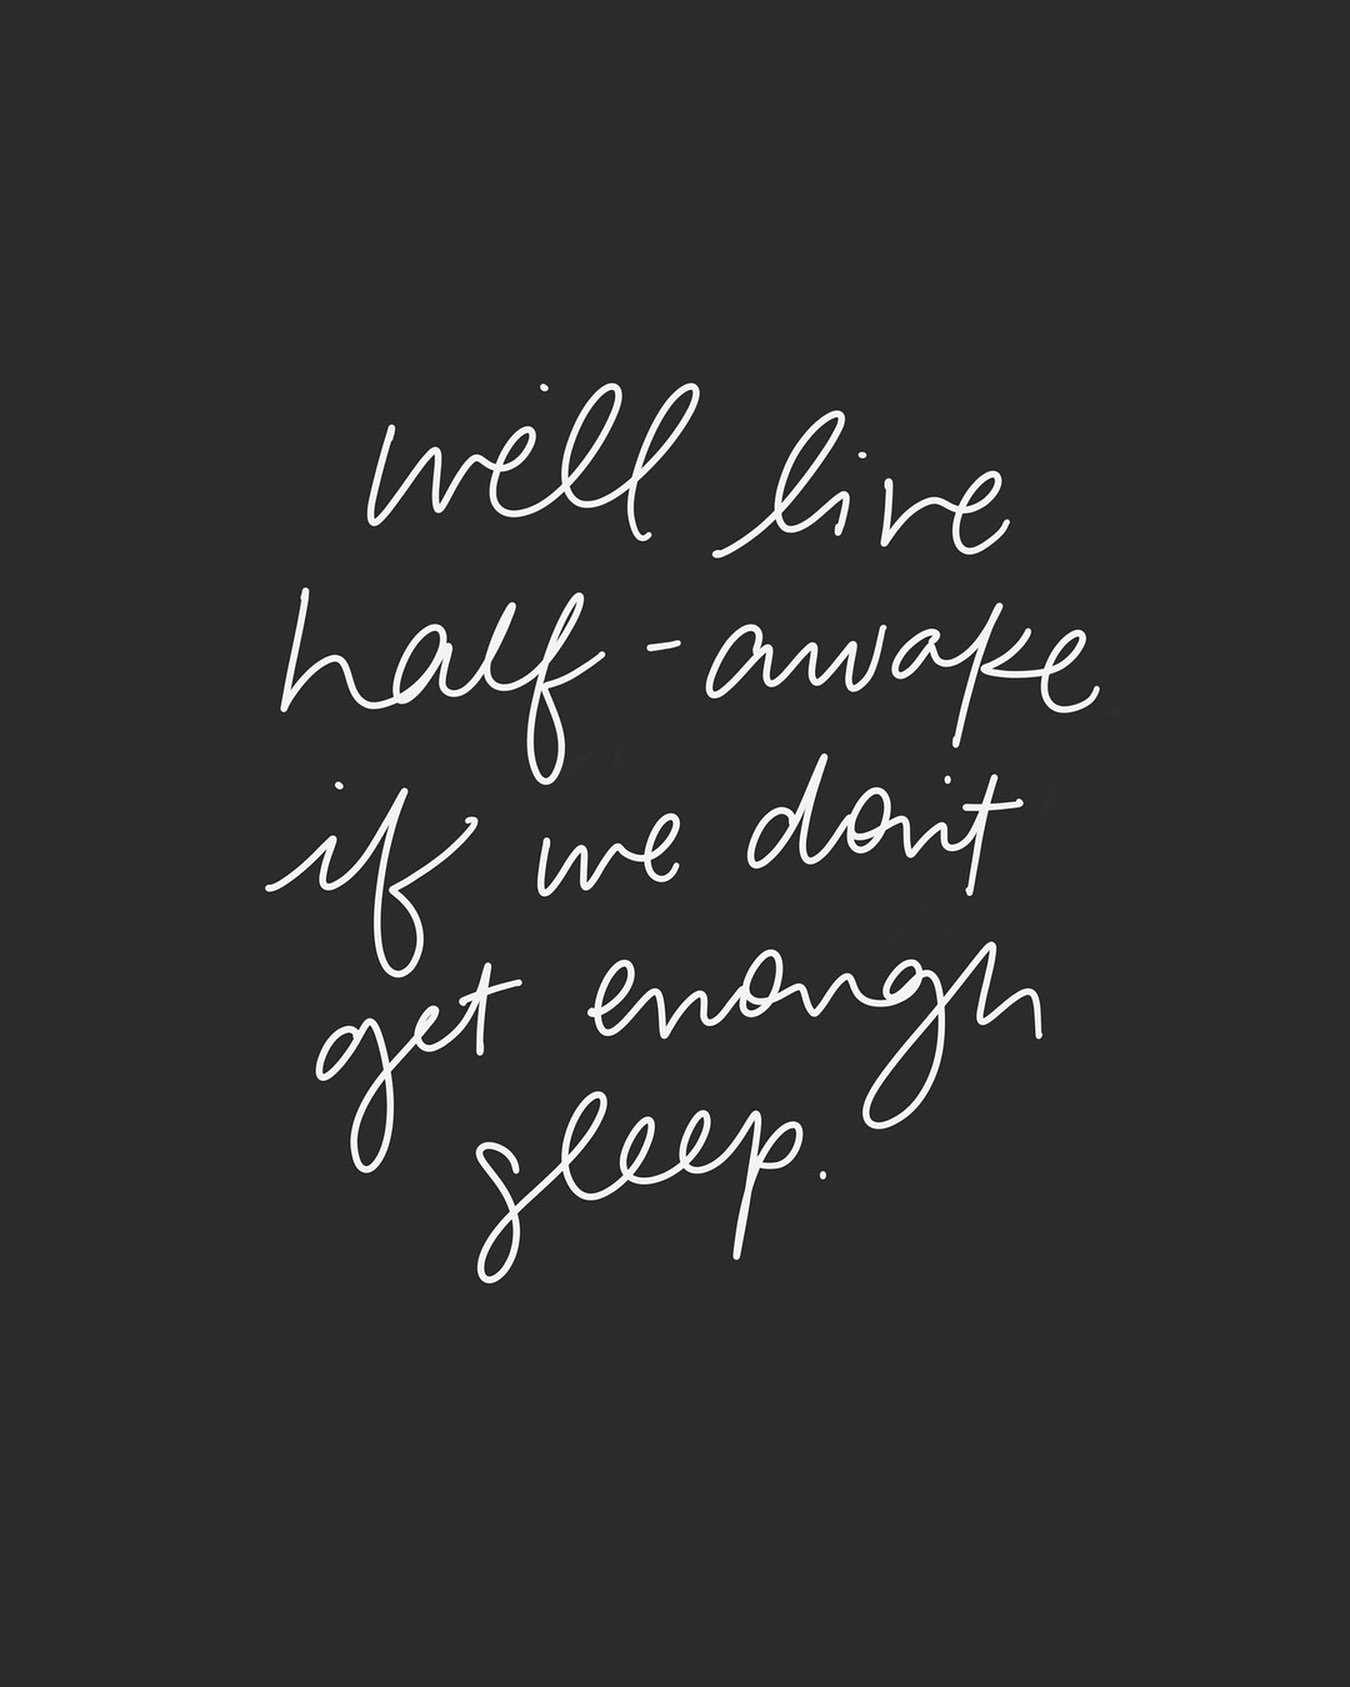 Sleep isn&rsquo;t always the answer. There are multiple forms of fatigue and multiple forms of rest. You could be spiritually tired, physically exhausted, mentally fatigued, or emotionally overwhelmed.
⠀⠀⠀⠀⠀⠀⠀⠀⠀
The question is: do we want to keep li